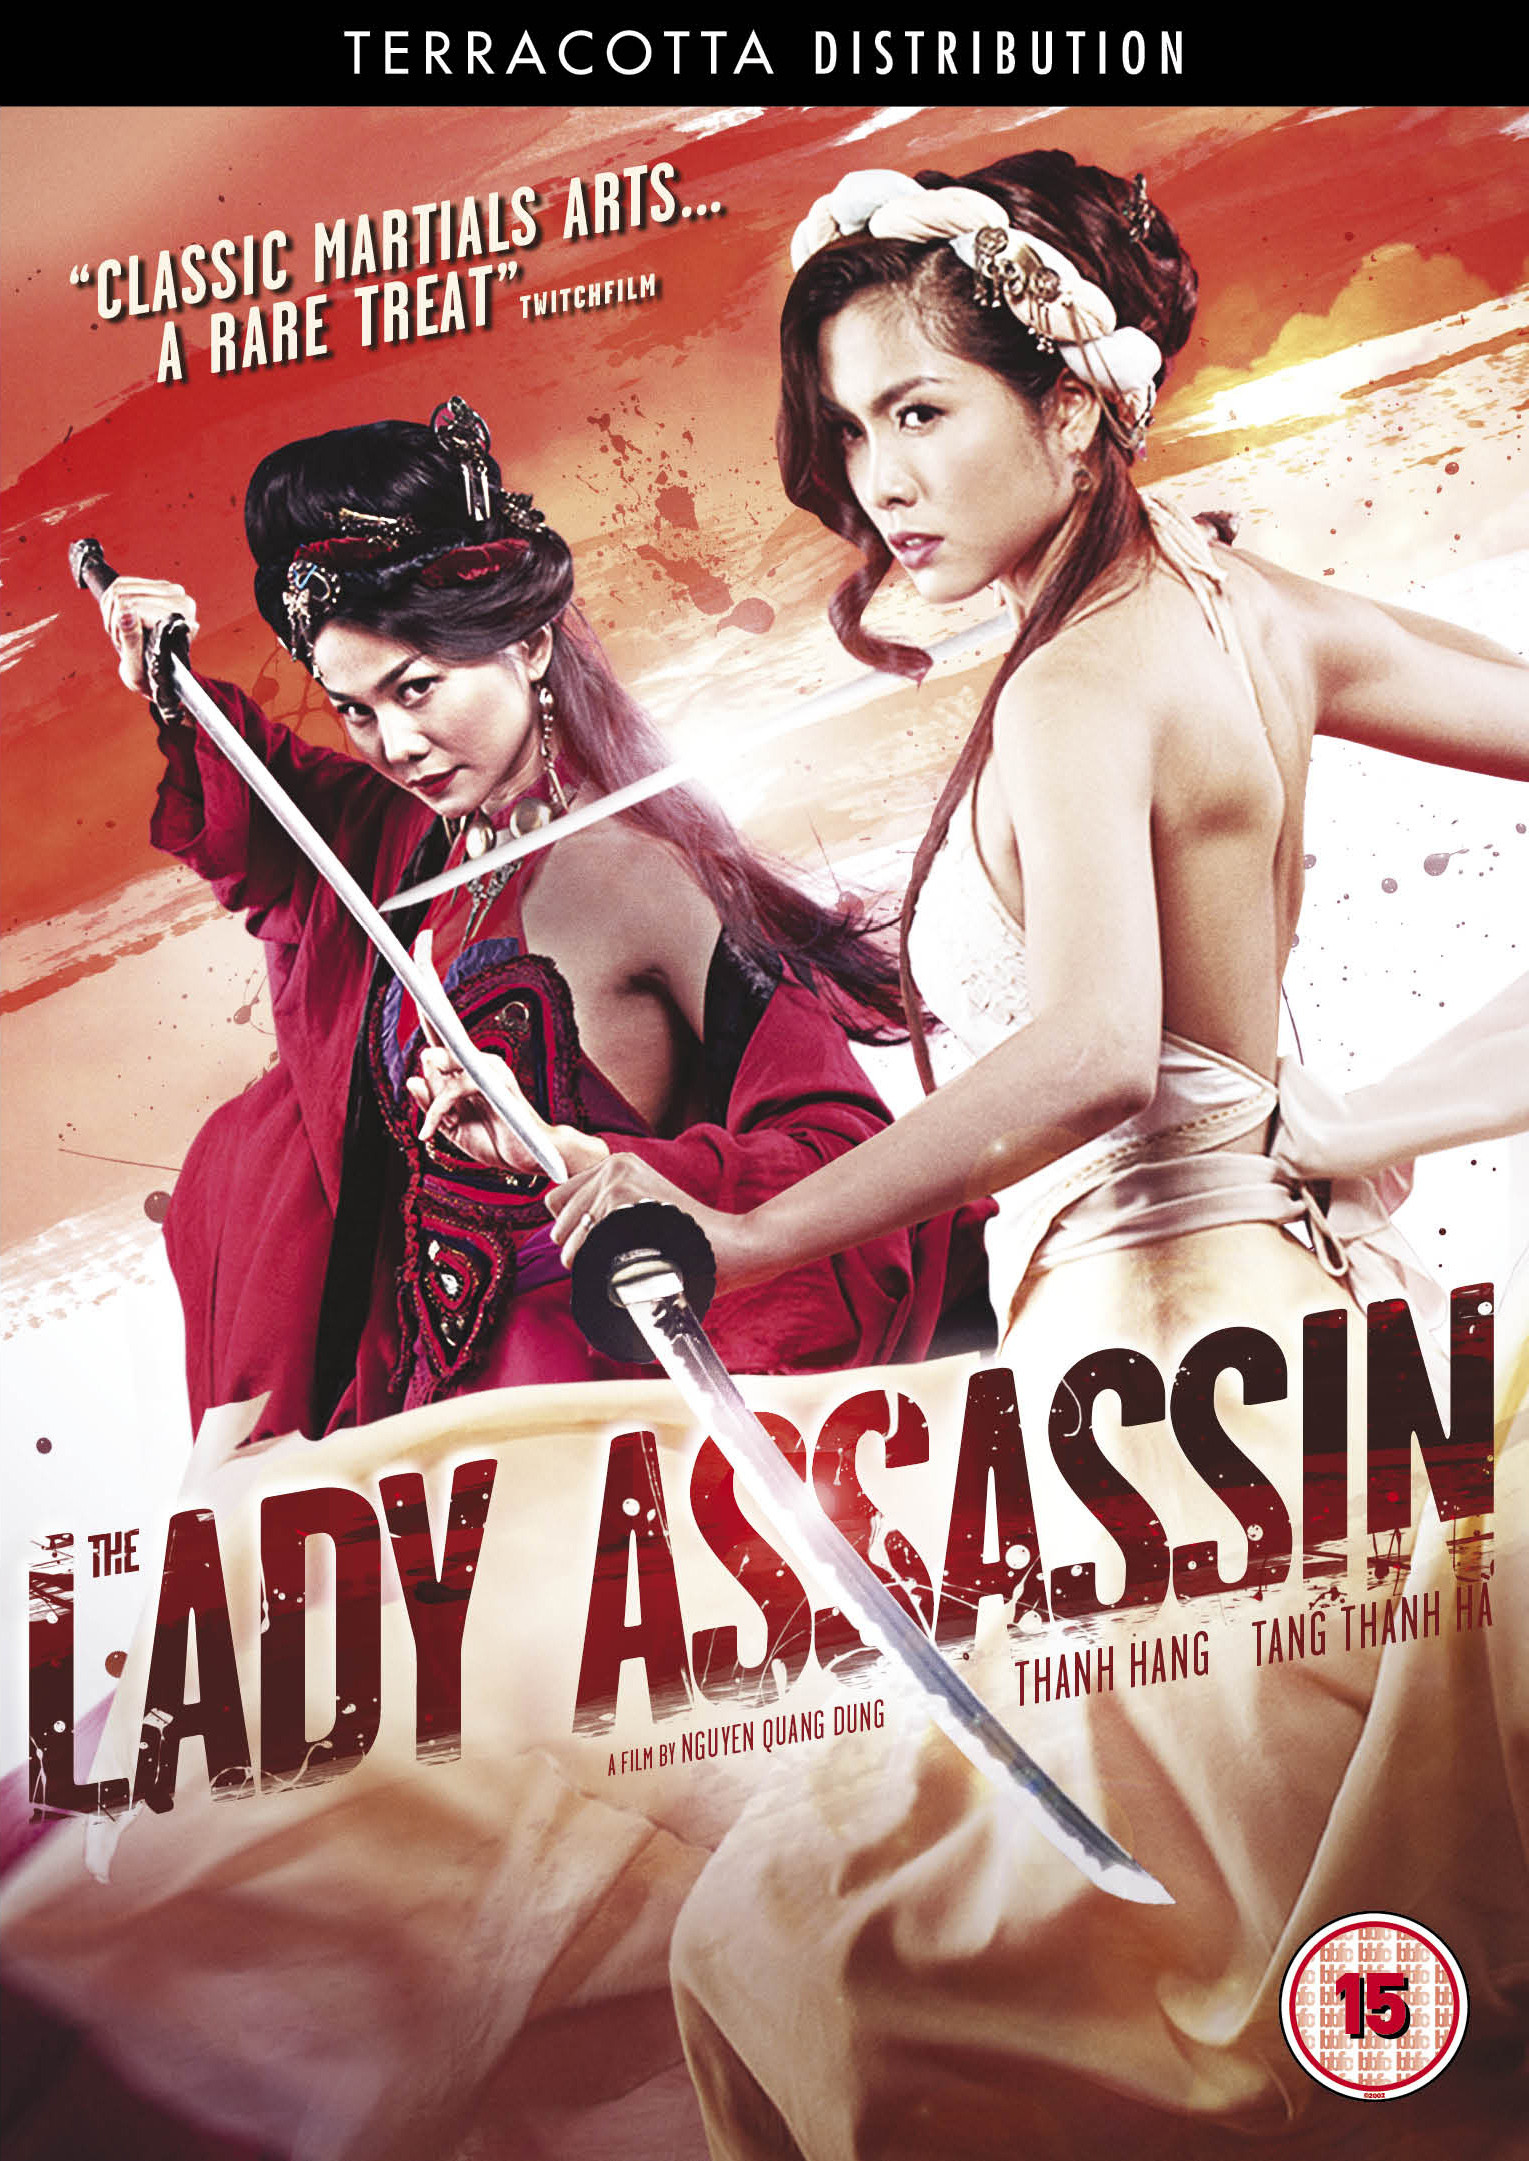 The Lady Assassin 2013